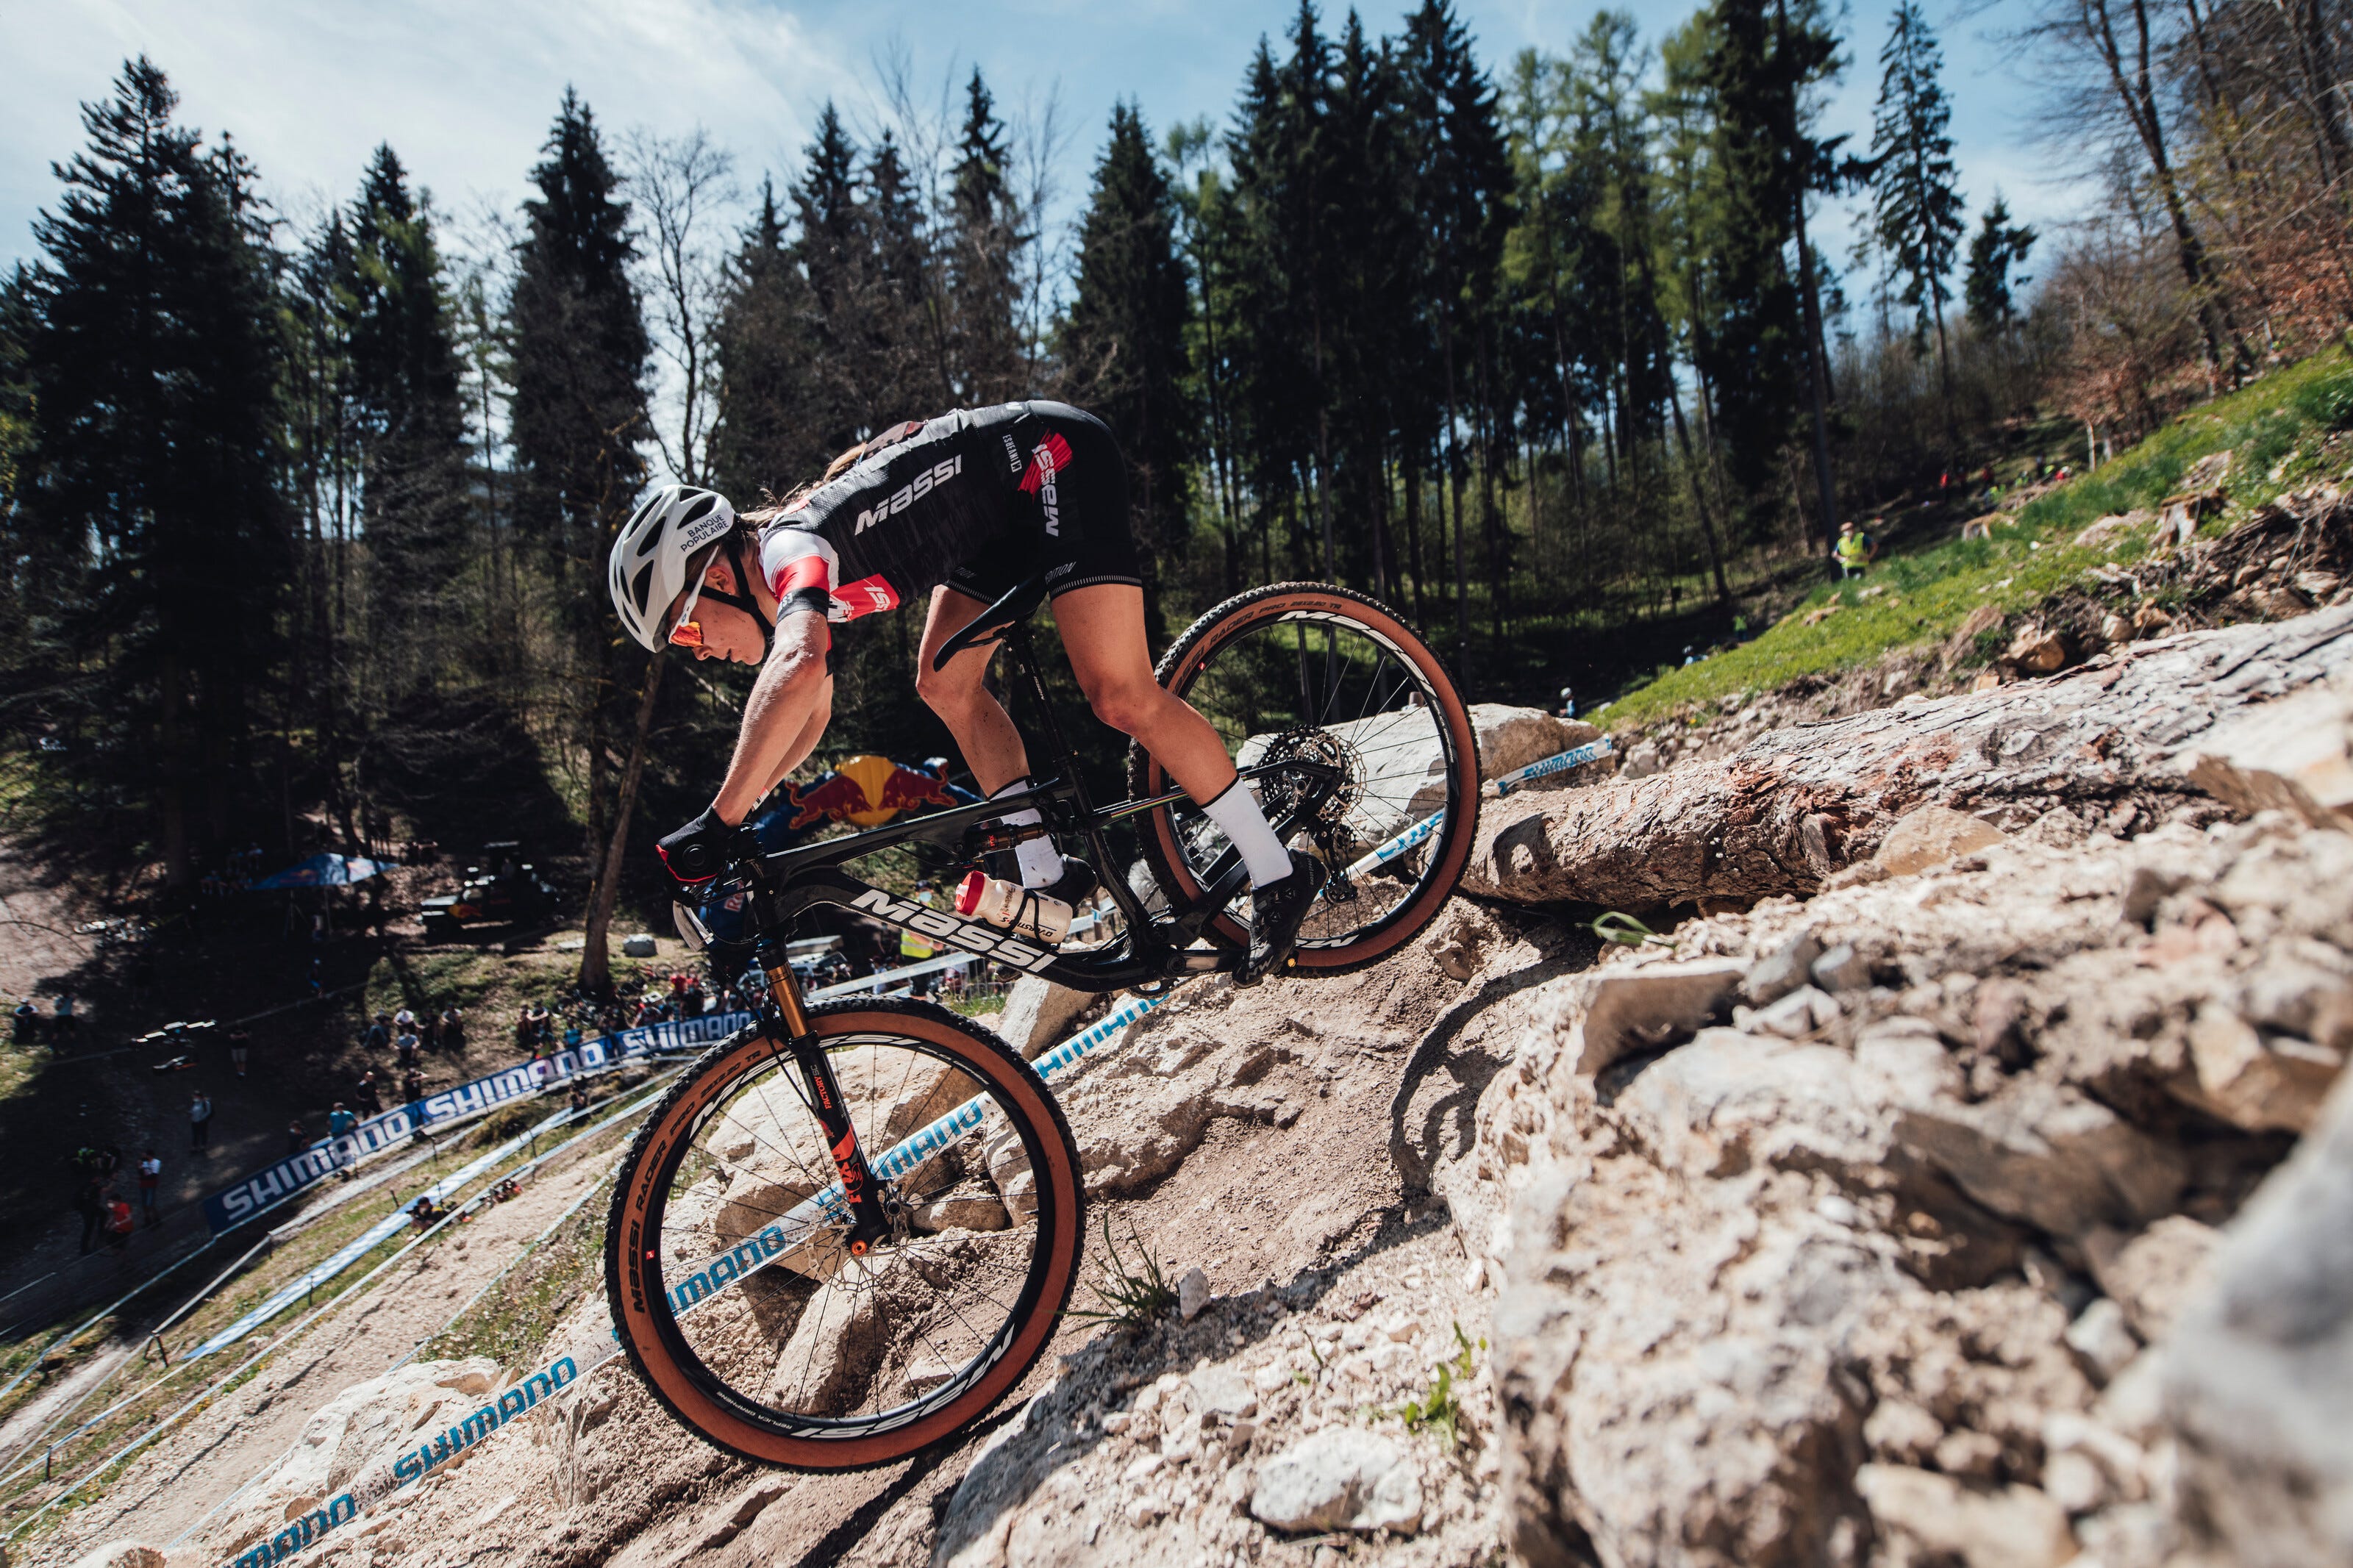 banana delicacy Oblong 2021 XCO World Cup Starts with a Pictante Weekend in Albstadt